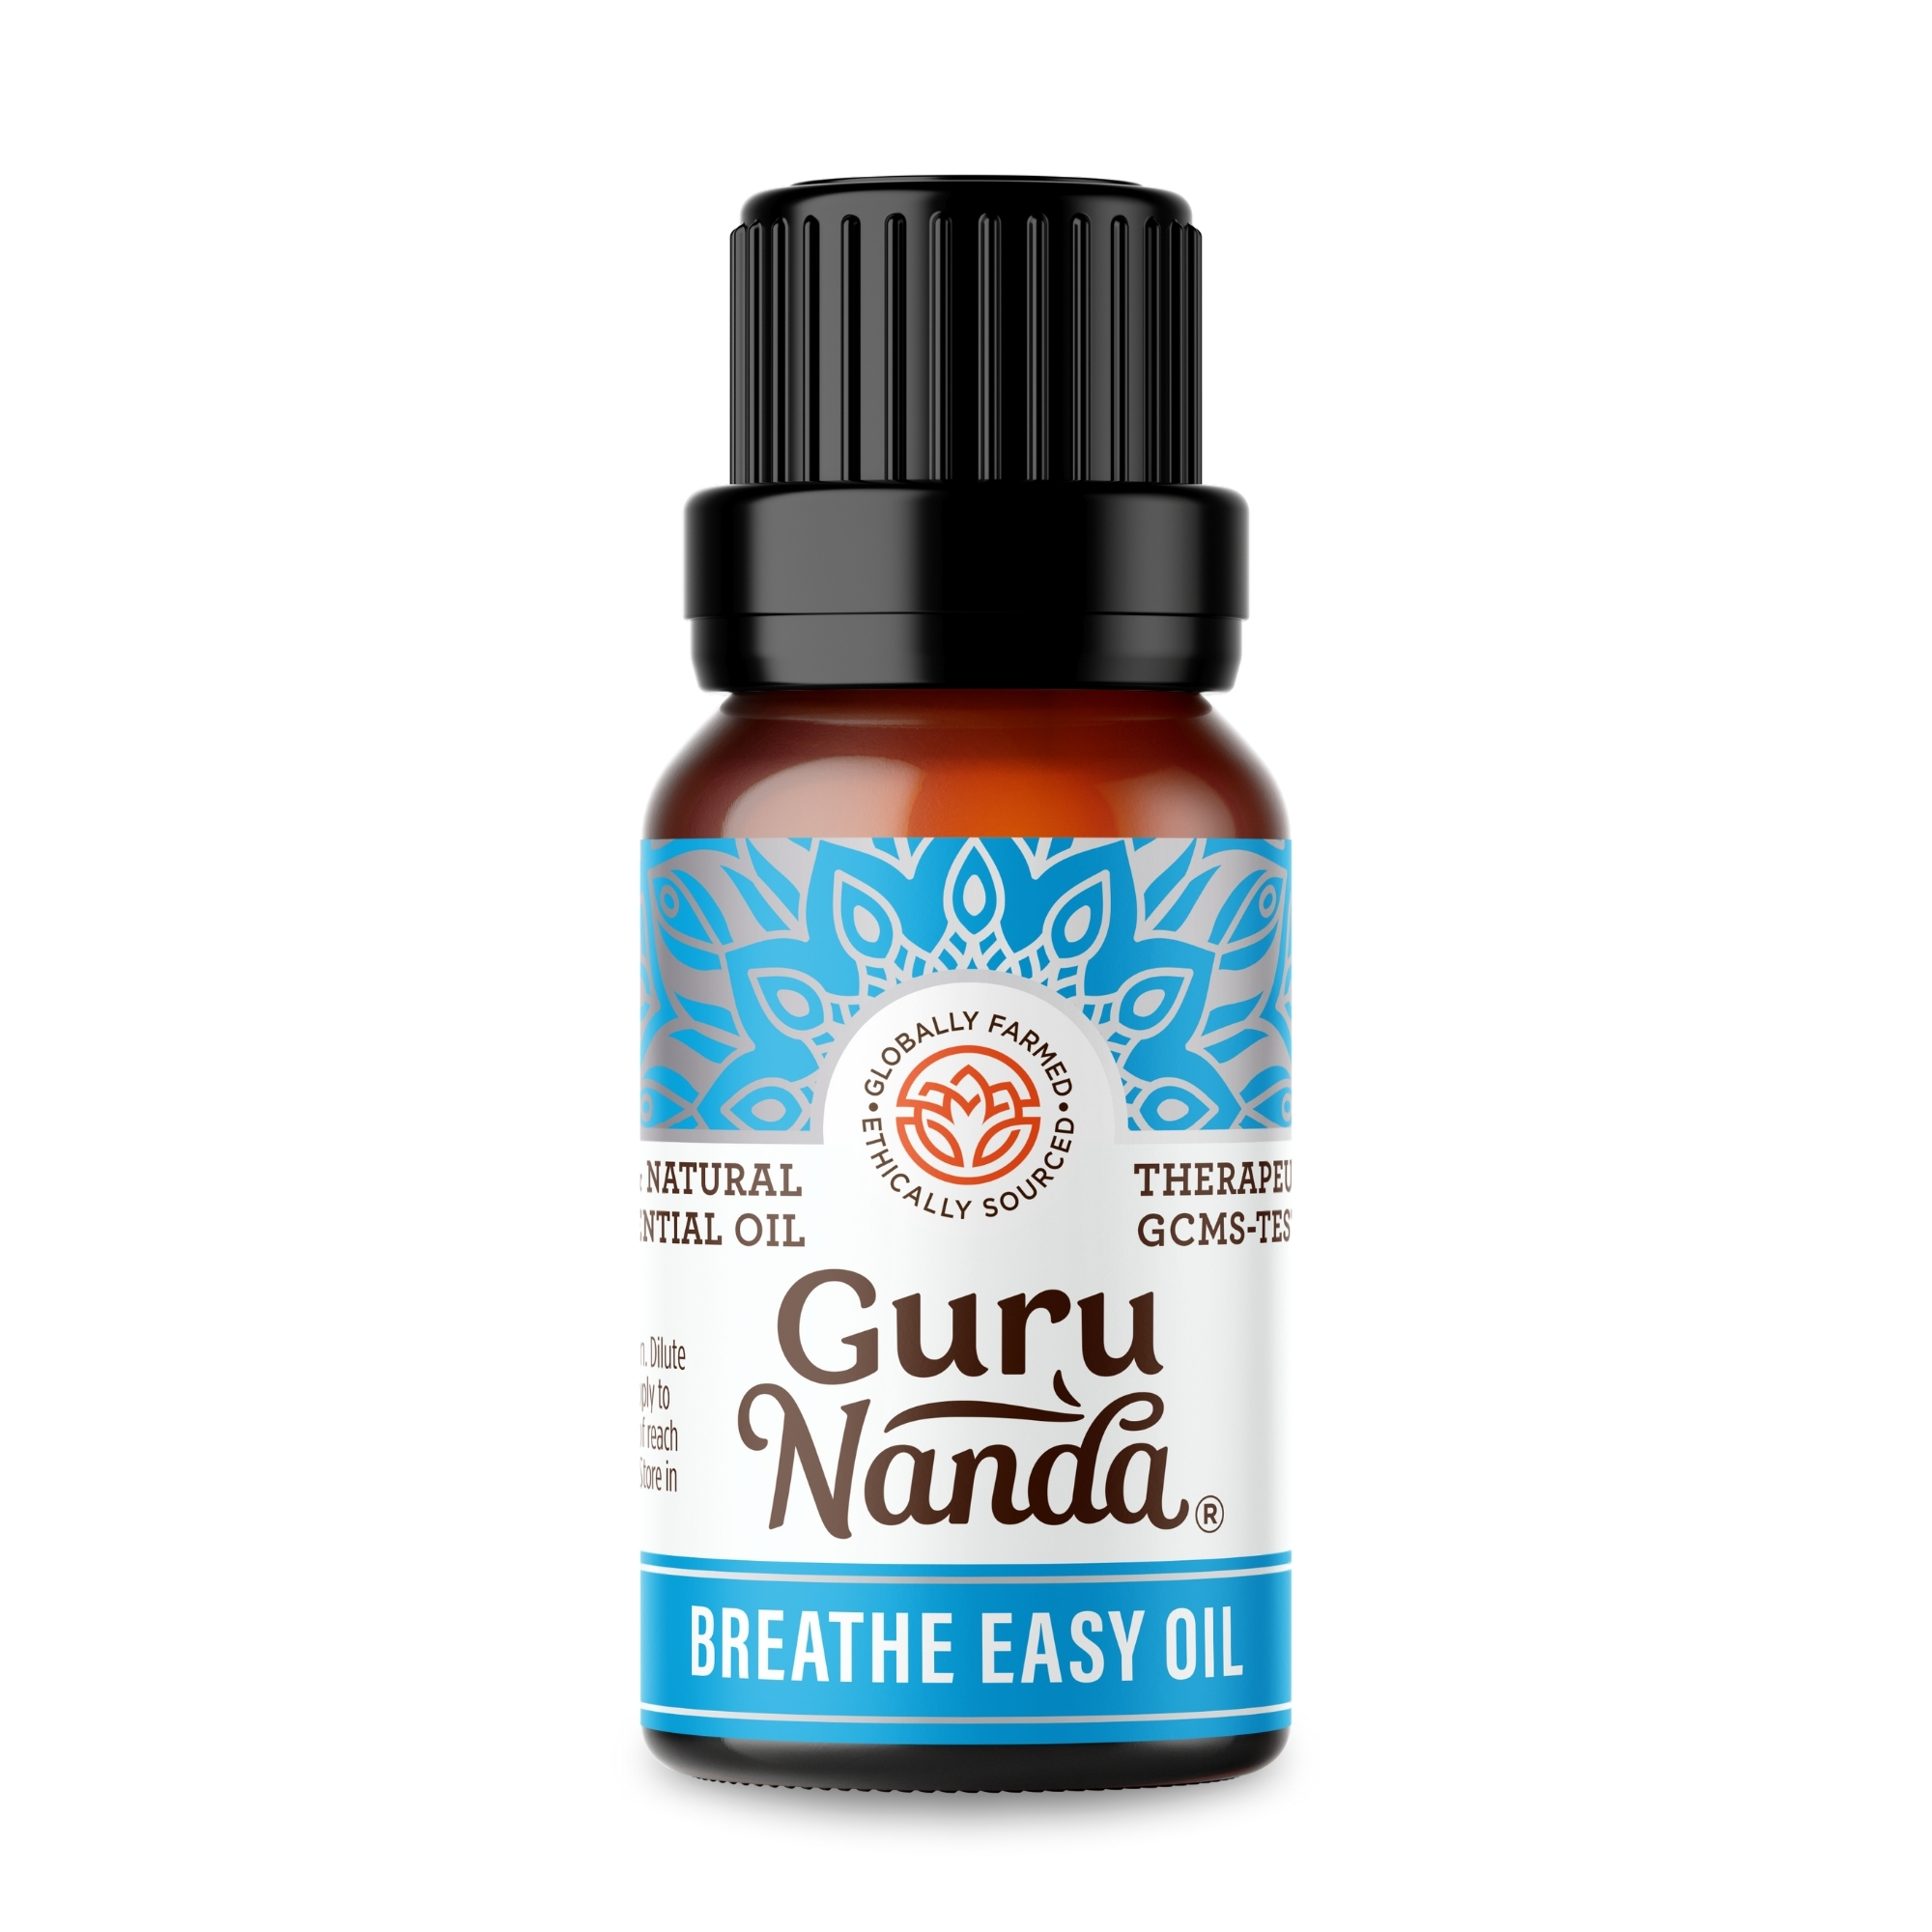 GuruNanda Breathe Easy Essential Oil Blend for Aromatherapy & Diffuser - 15mL - image 1 of 9